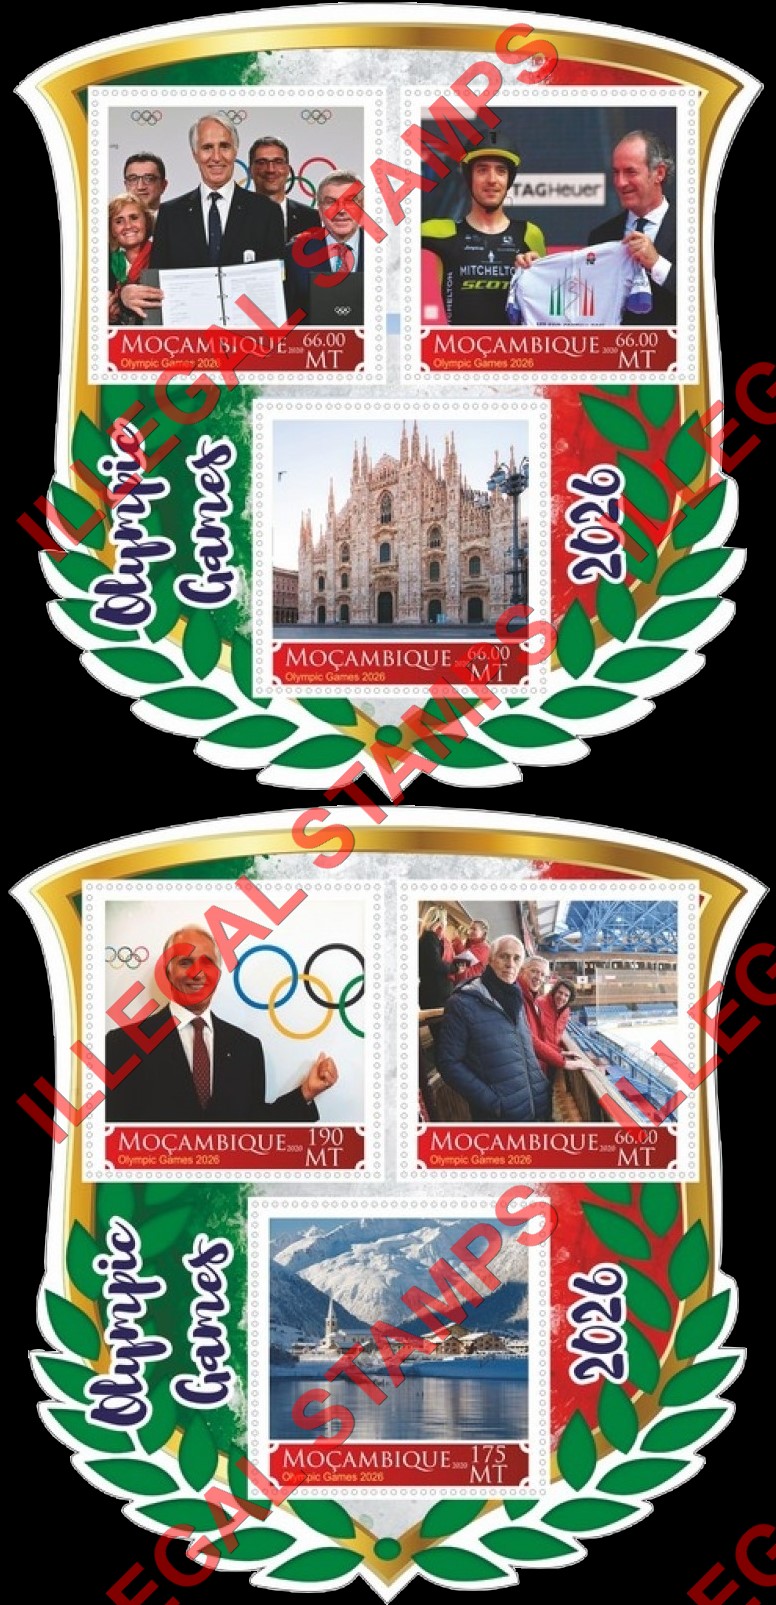  Mozambique 2020 Olympic Games in Milan in 2026 Counterfeit Illegal Stamp Souvenir Sheets of 3